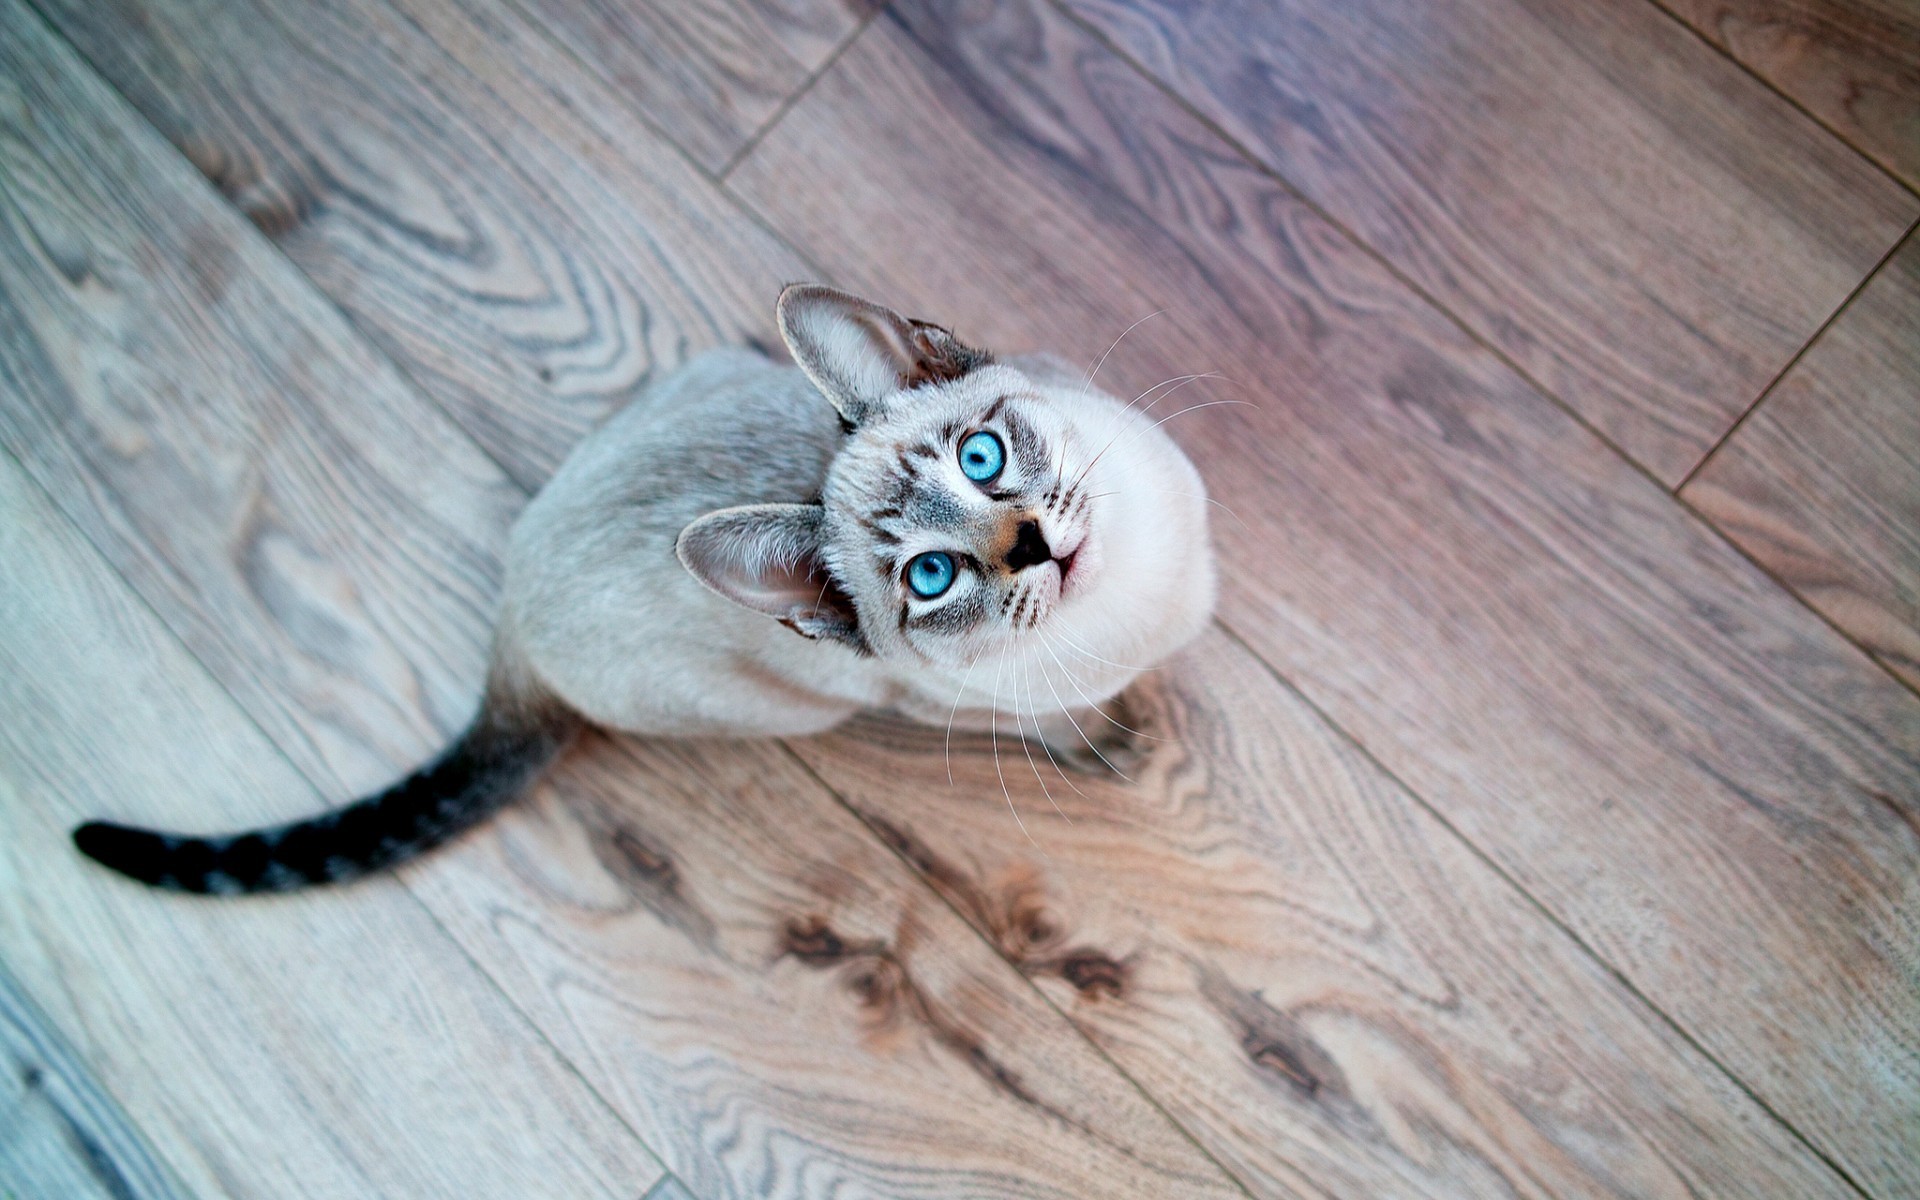 General 1920x1200 animals cats looking up wooden surface mammals indoors animal eyes blue eyes closeup top view